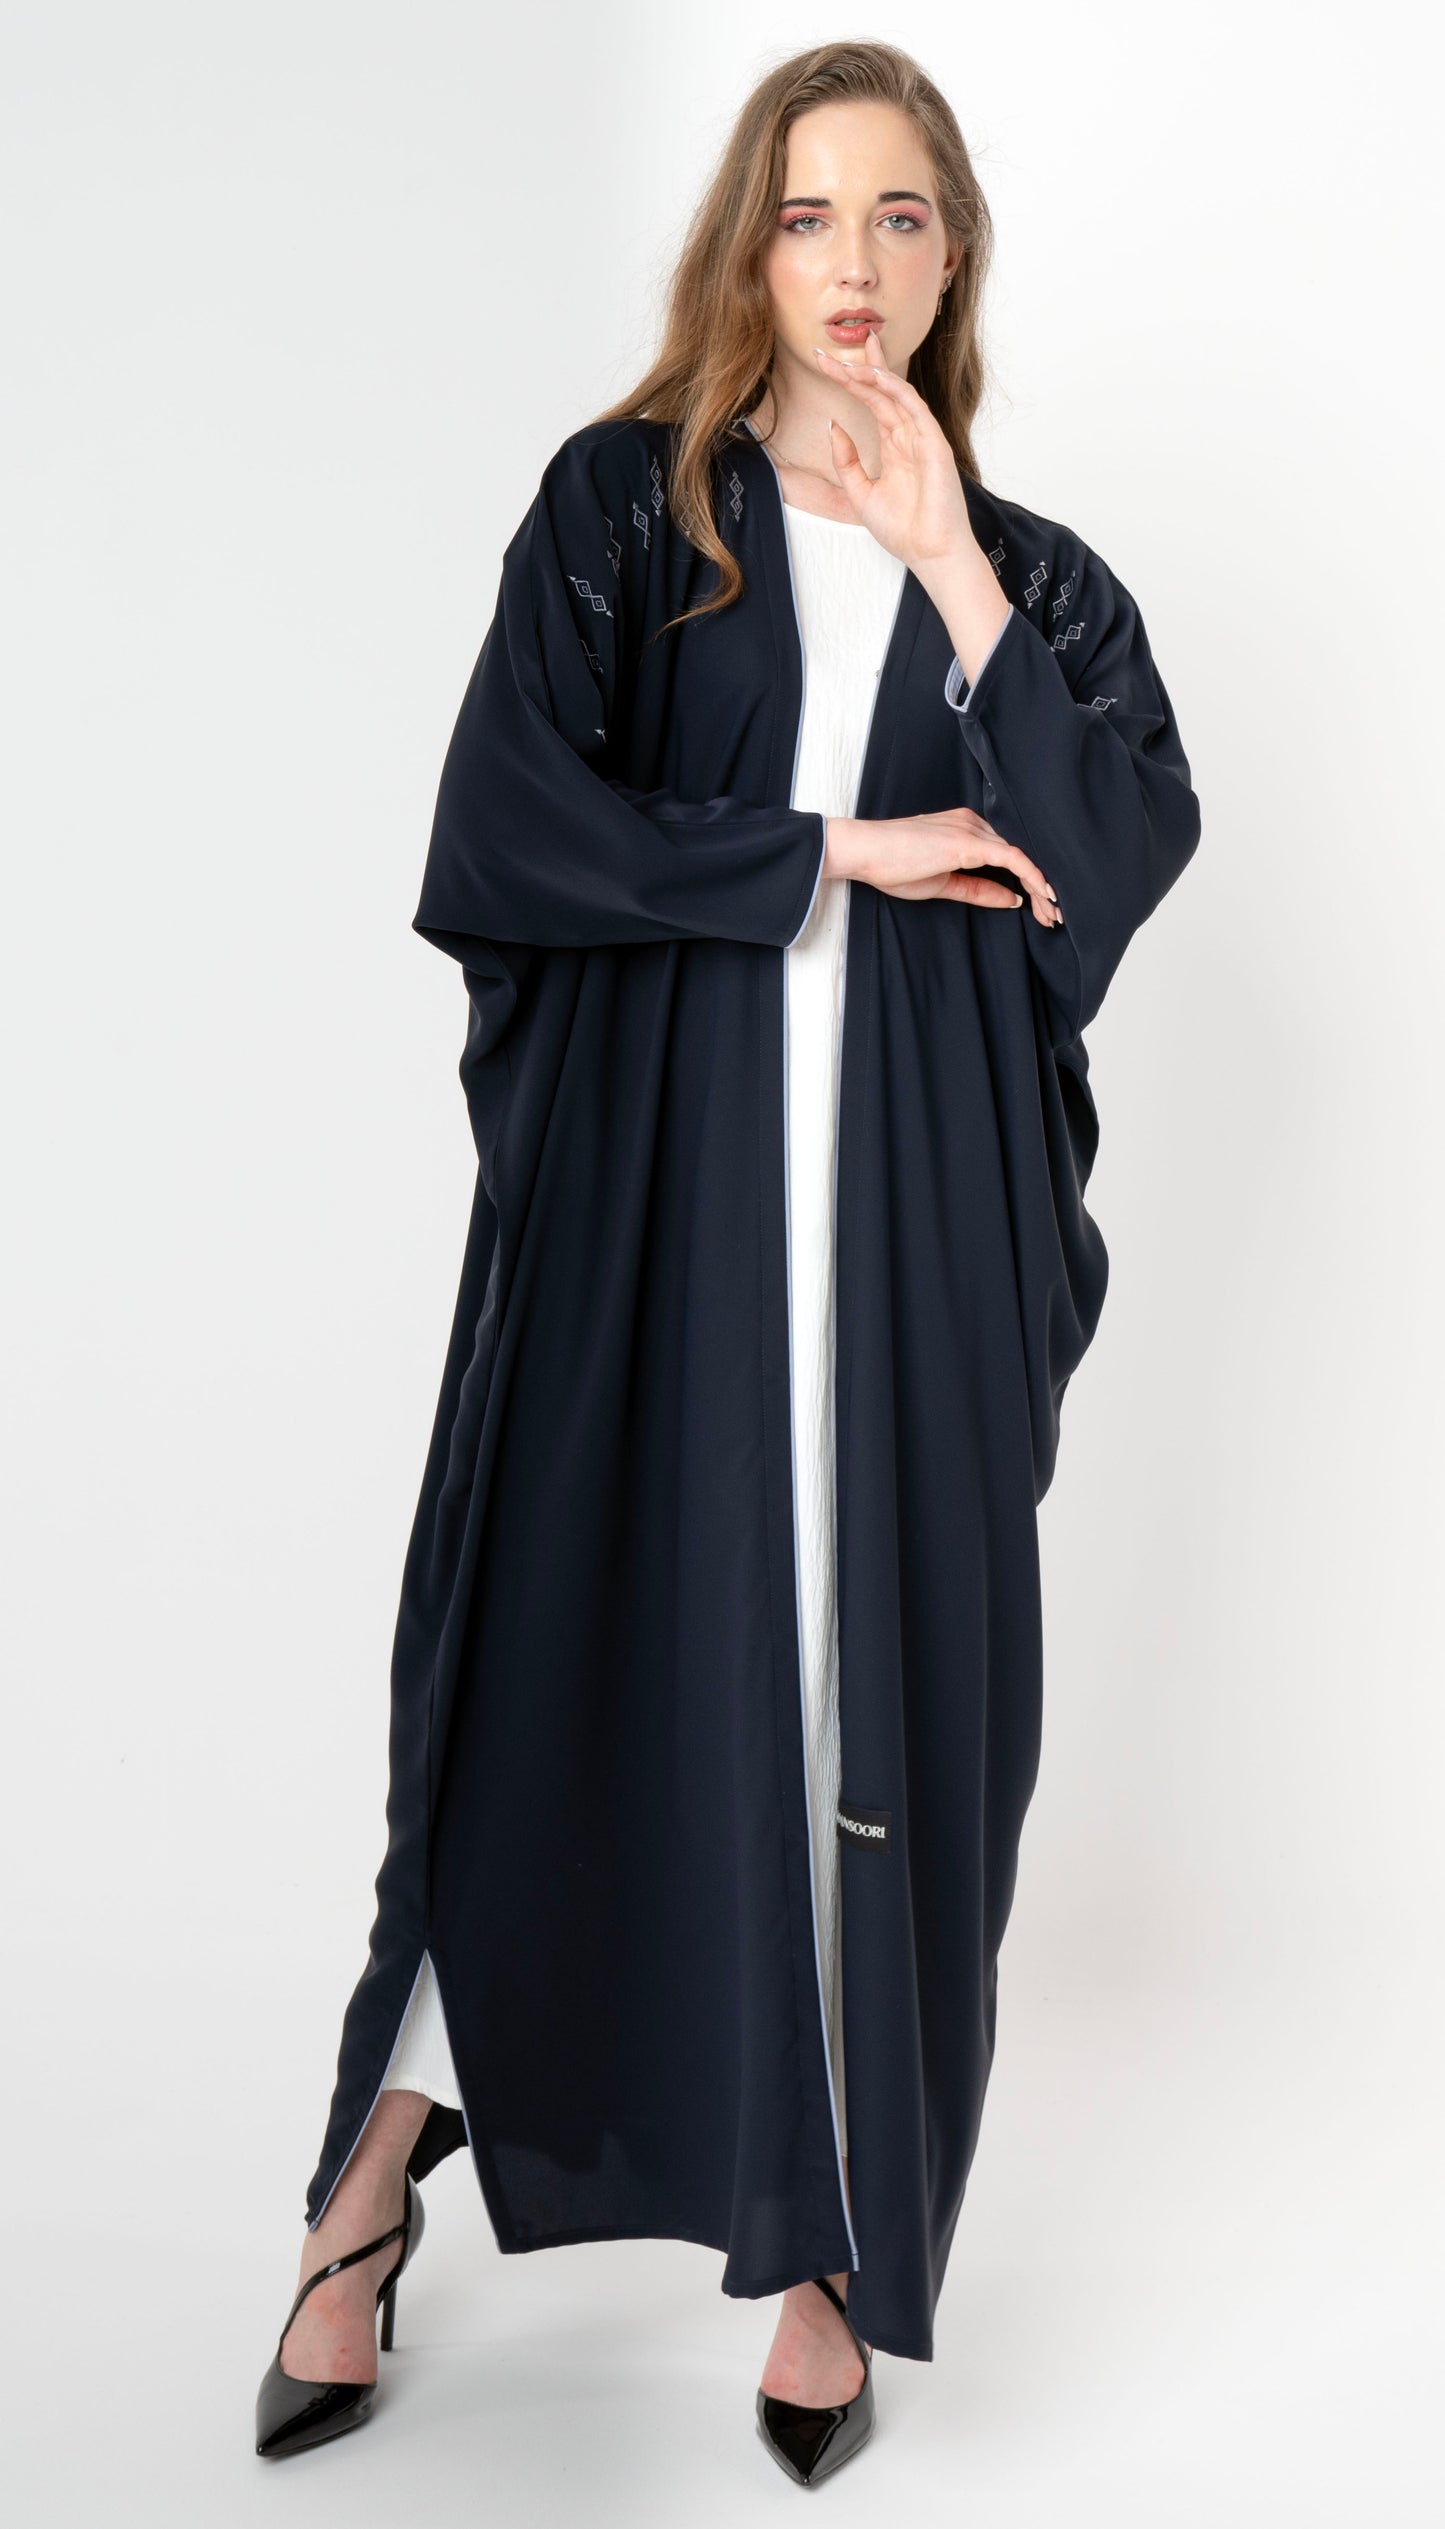 Embroidered Baharaini Style Abaya With Piping Detail